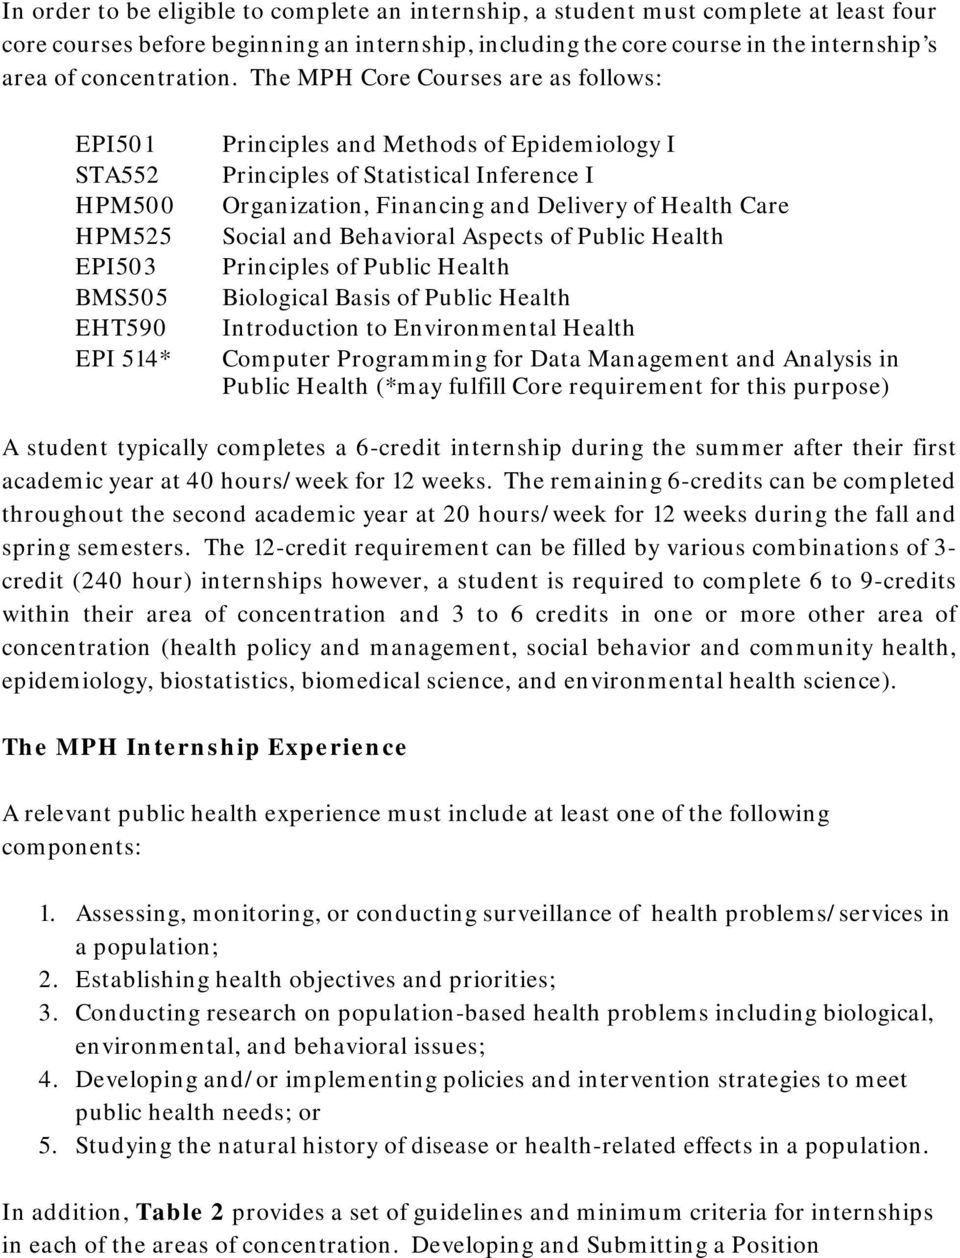 The MPH Core Courses are as follows: EPI501 STA552 HPM500 HPM525 EPI503 BMS505 EHT590 EPI 514* Principles and Methods of Epidemiology I Principles of Statistical Inference I Organization, Financing